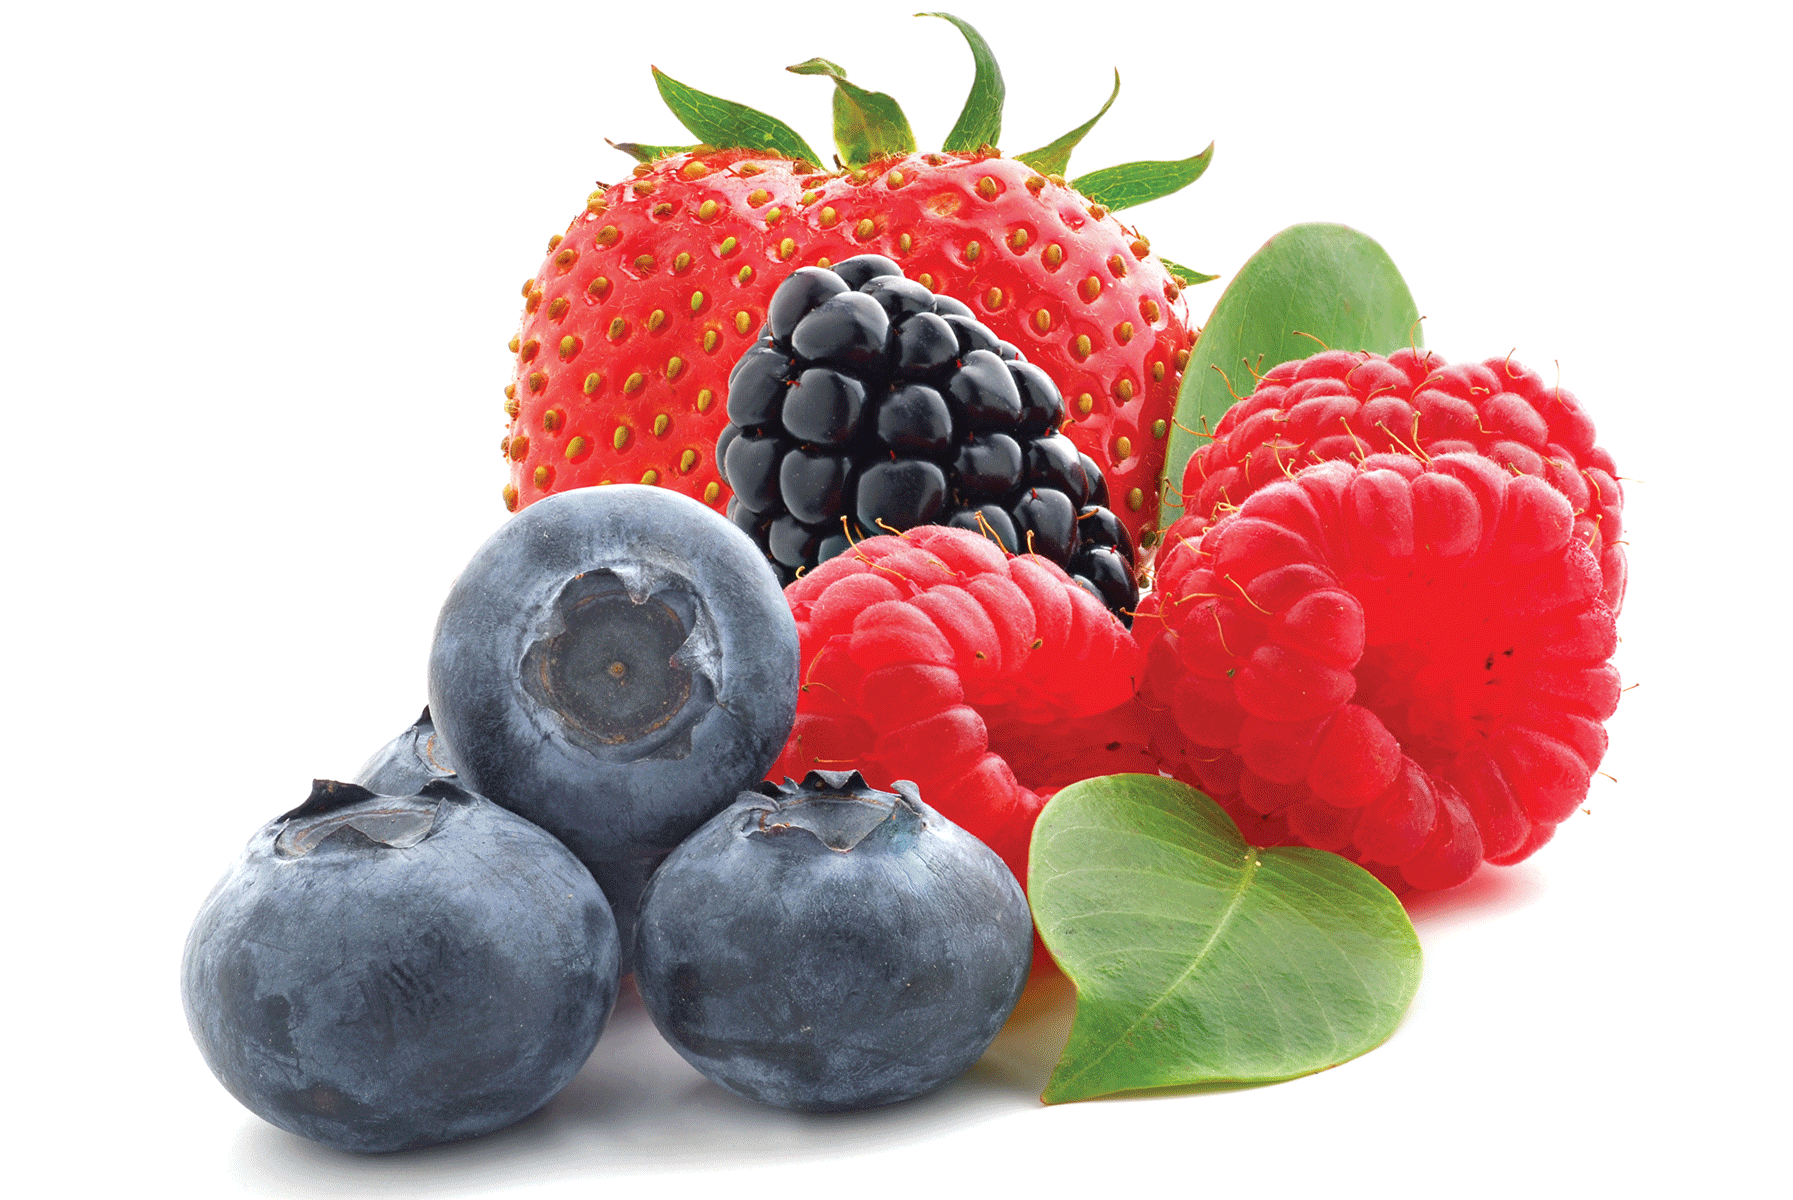 Flavonoid Intake and Dementia